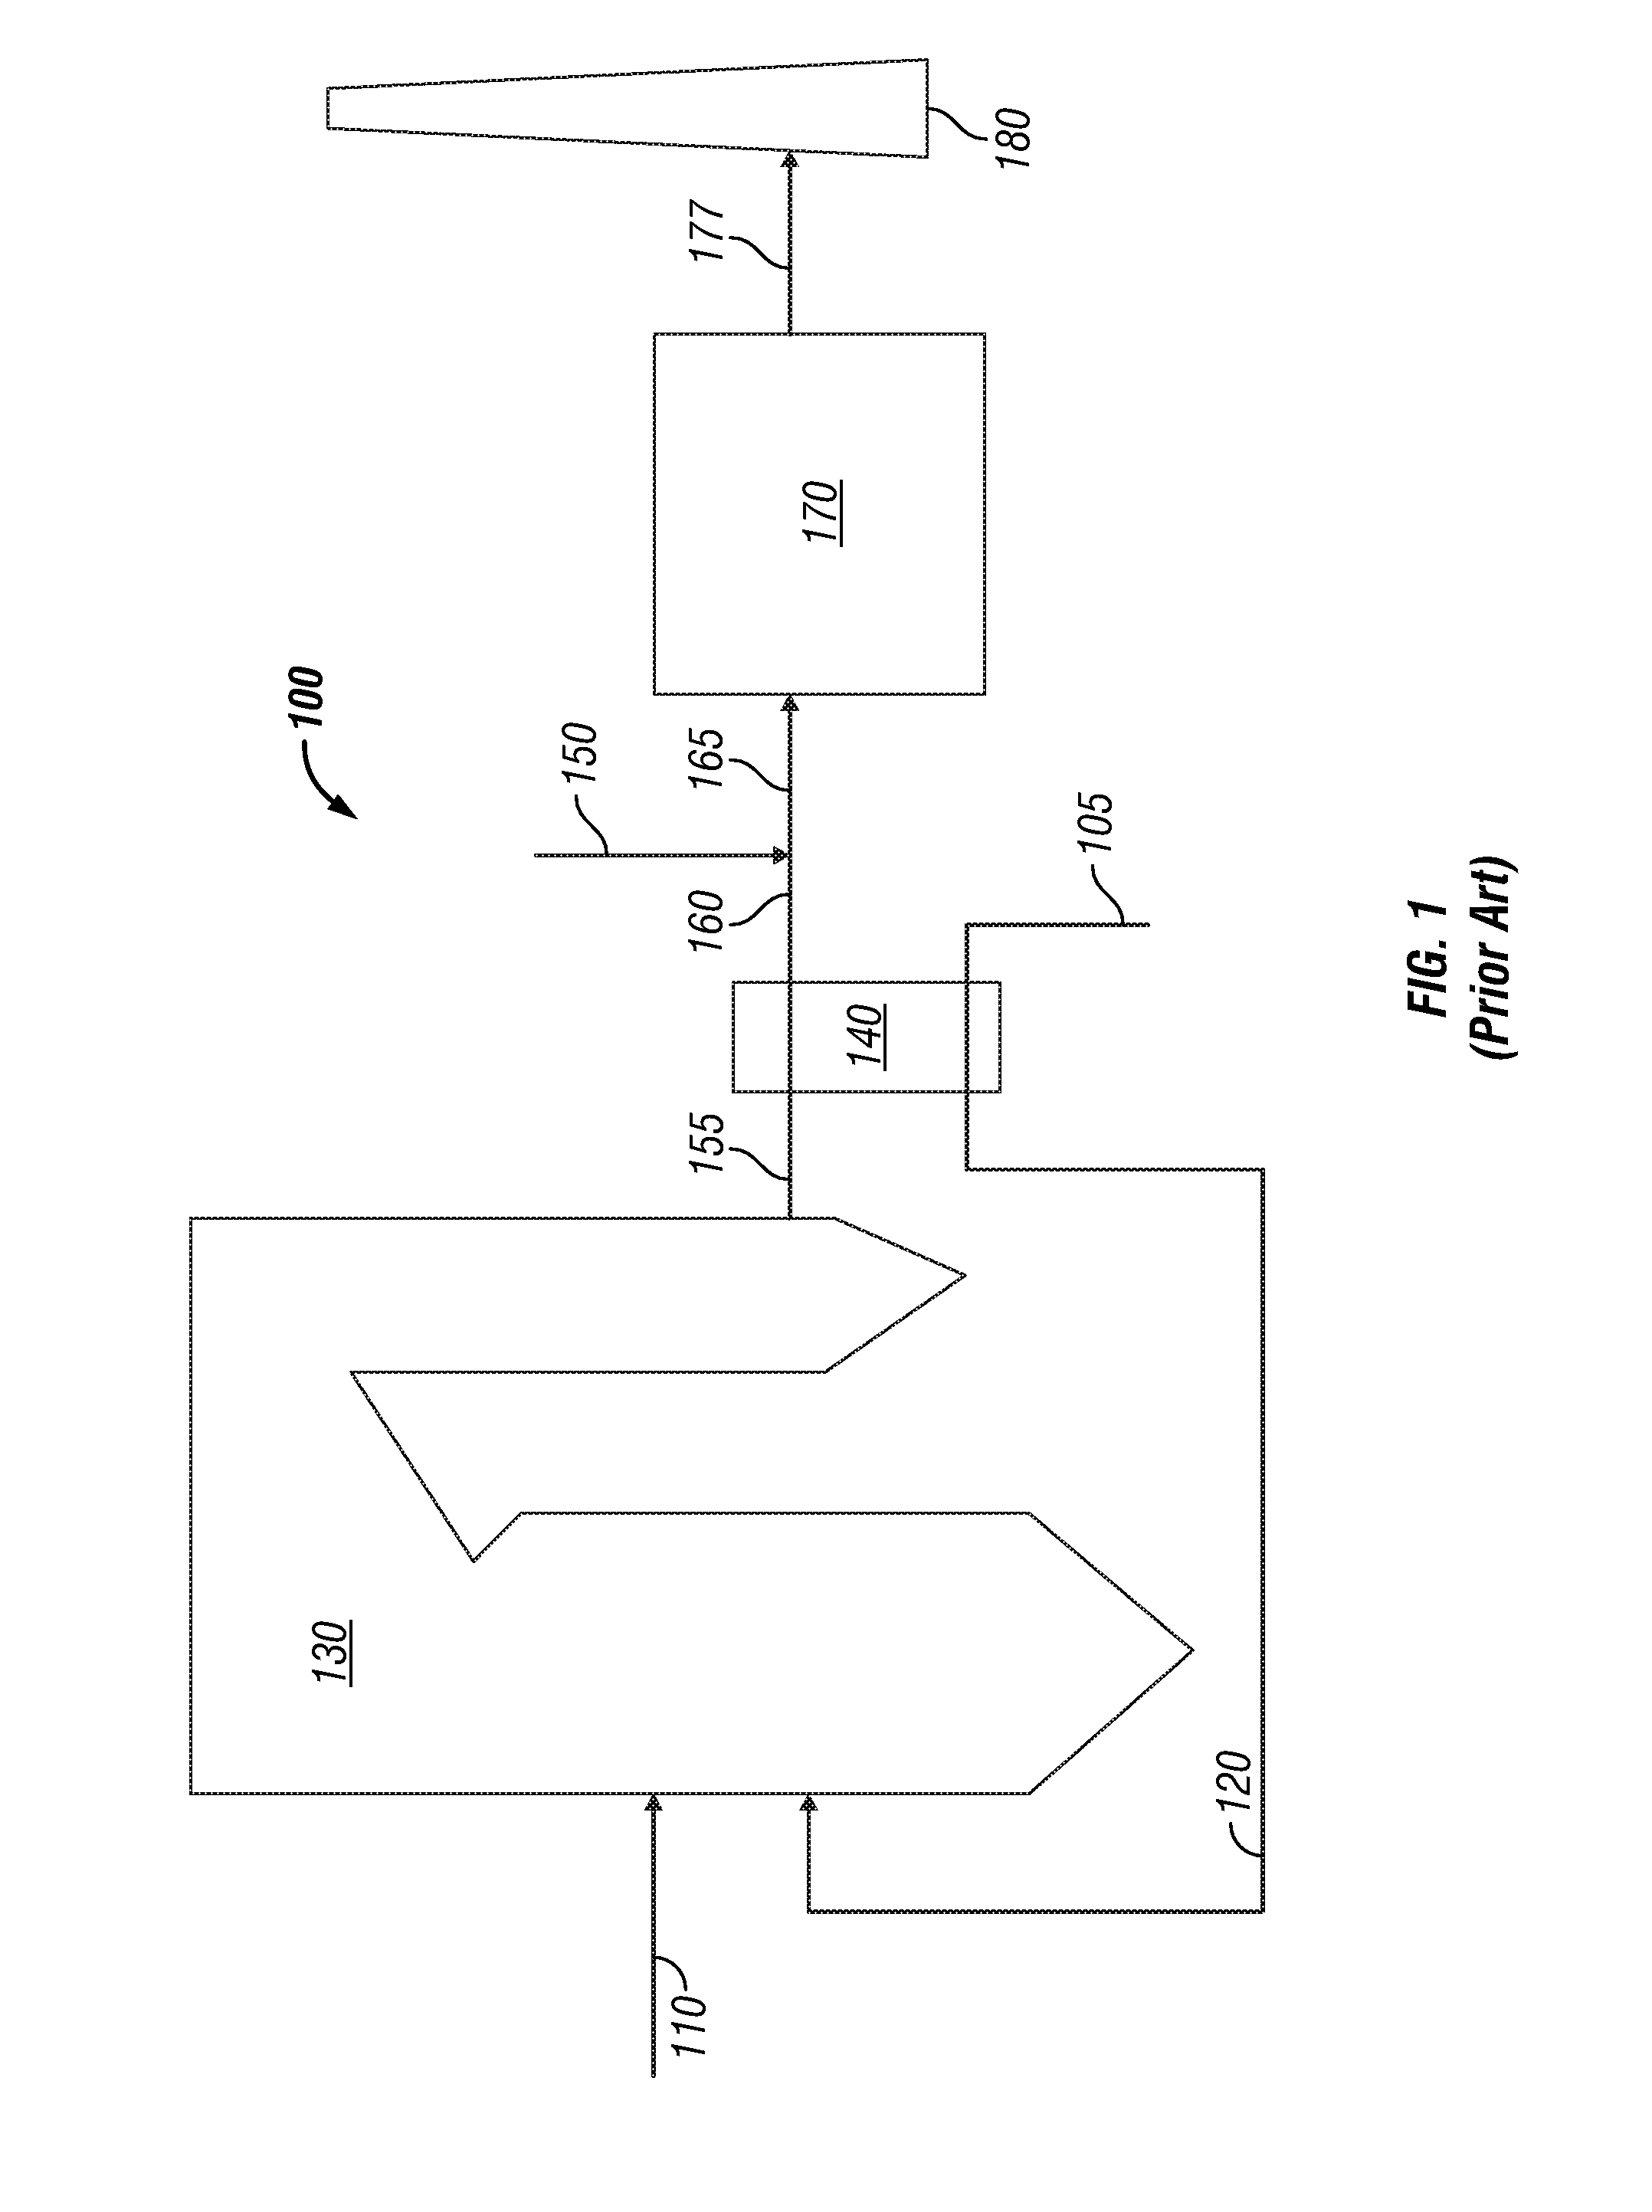 System and method for coproduction of activated carbon and steam/electricity